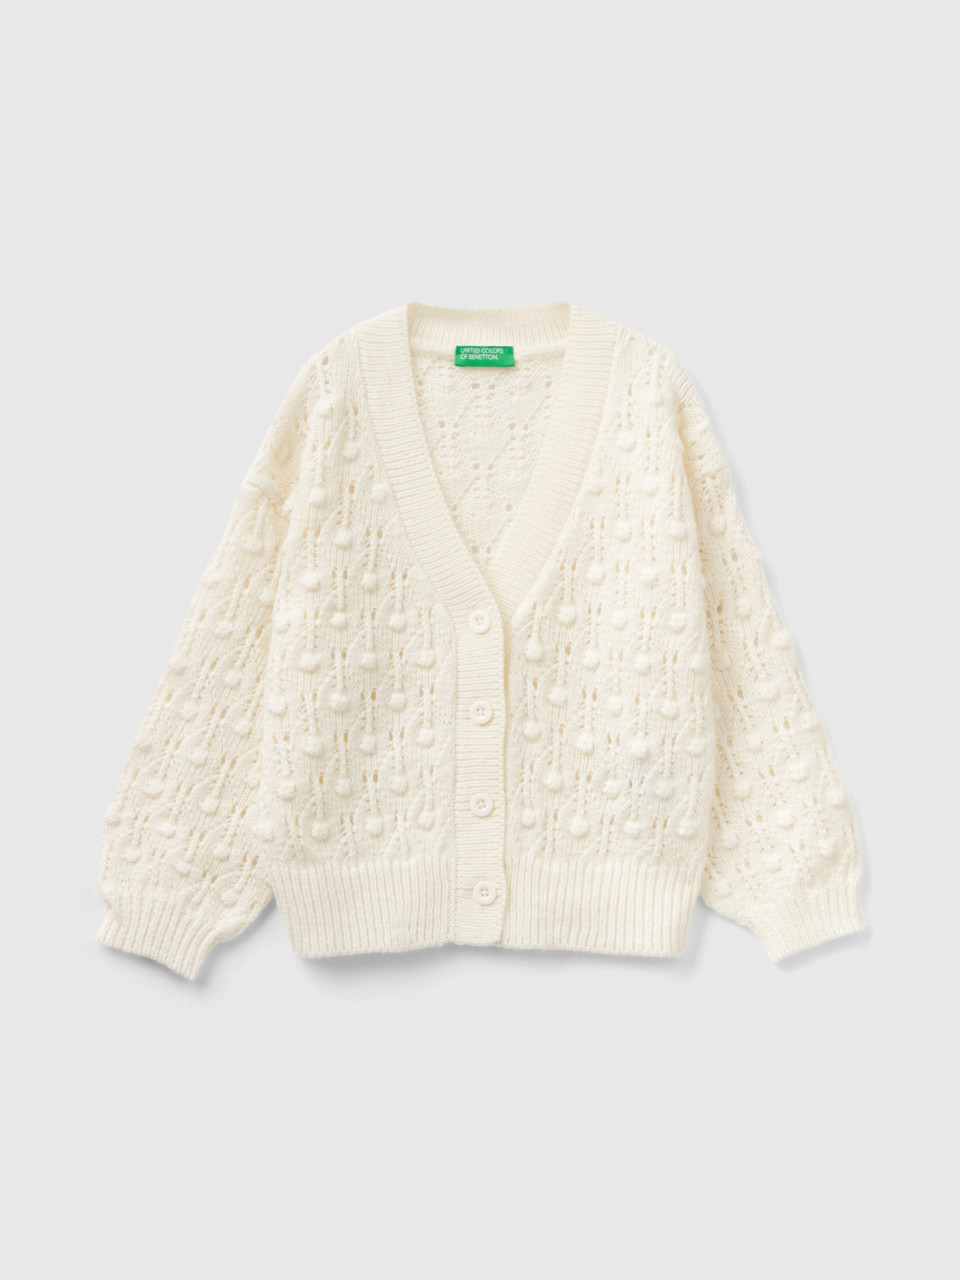 Benetton, Knit Cardigan With Buttons, White, Kids